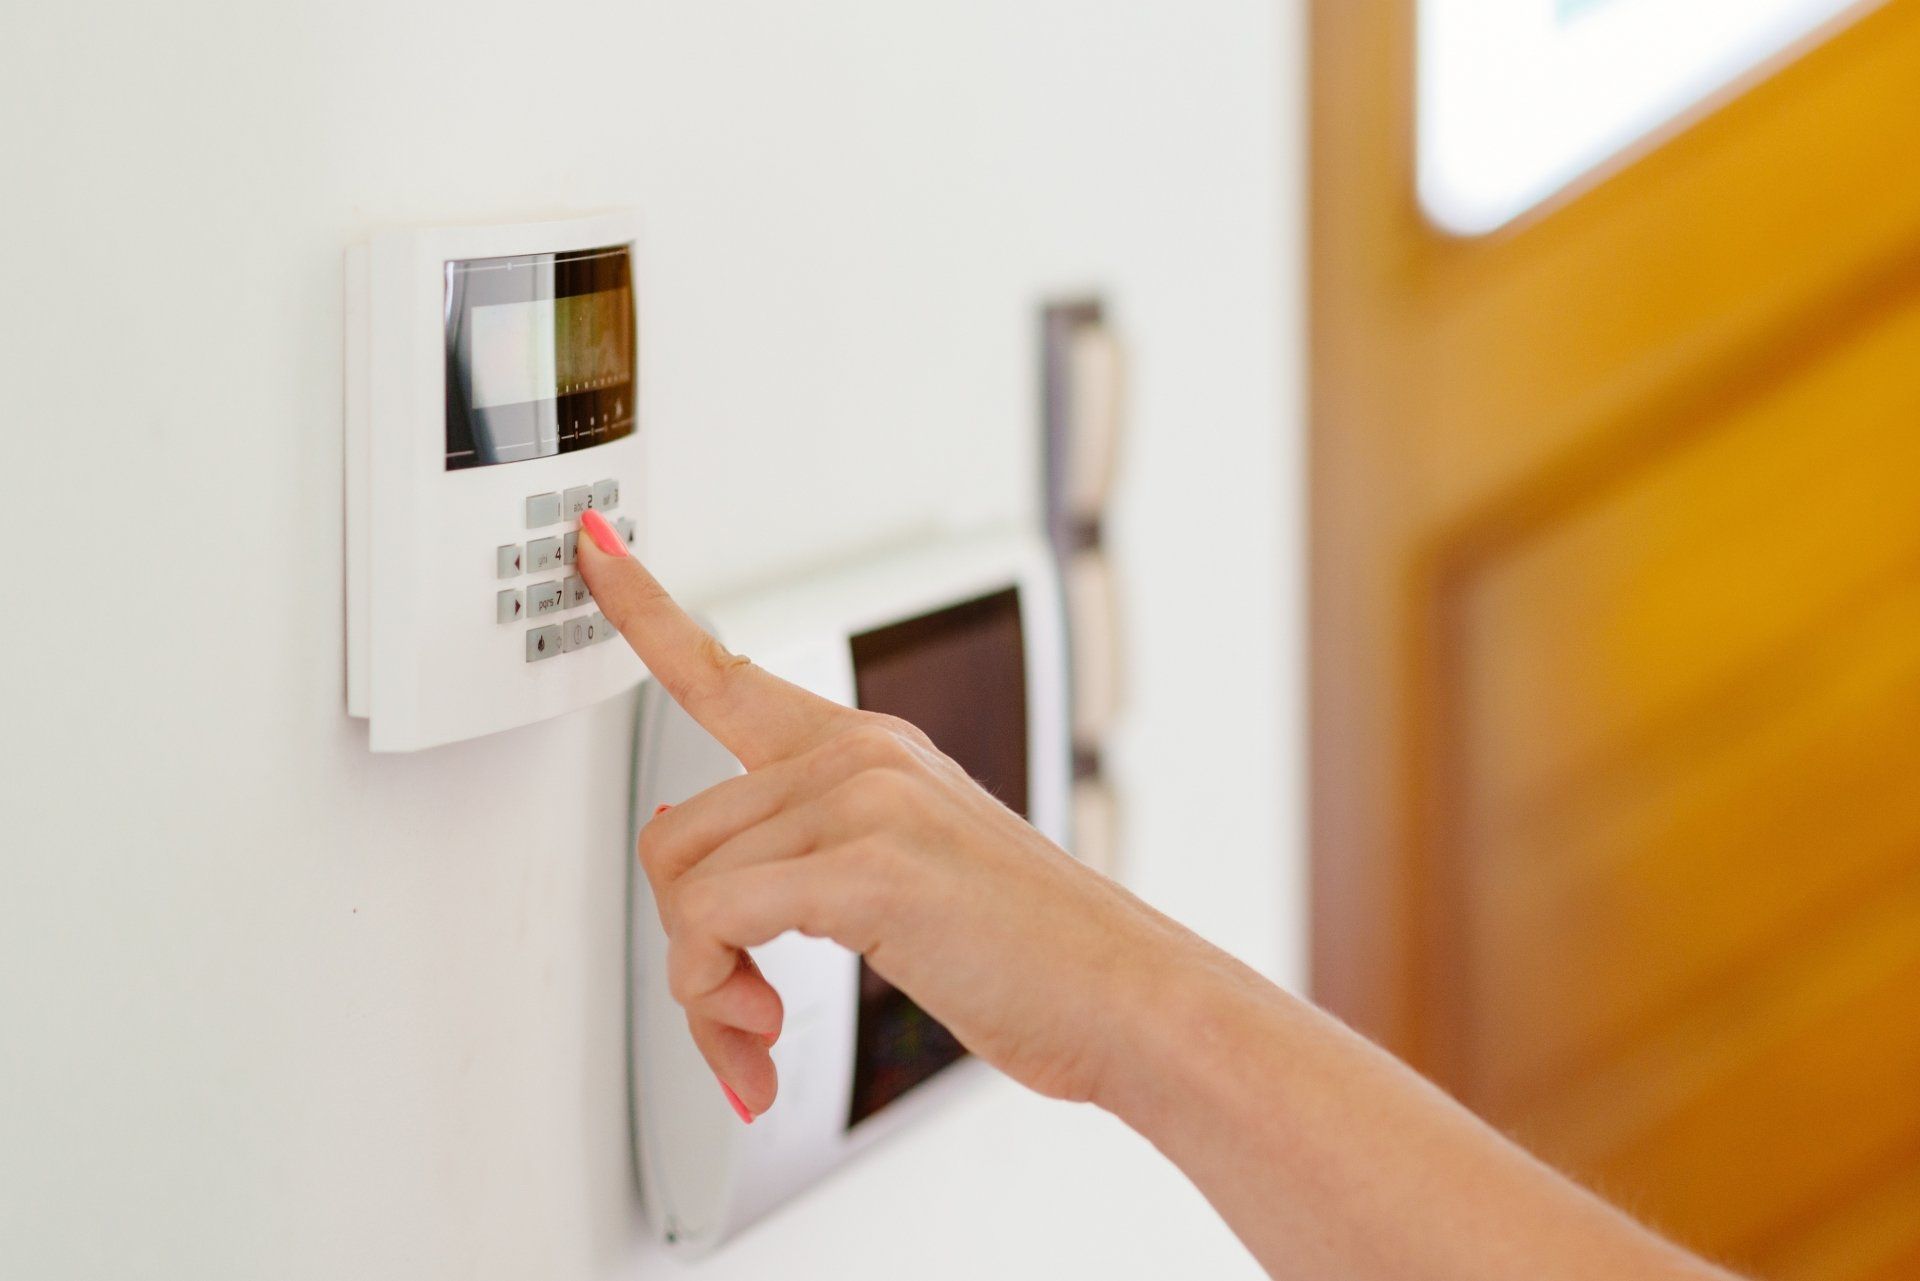 person adjusting and using alarm system